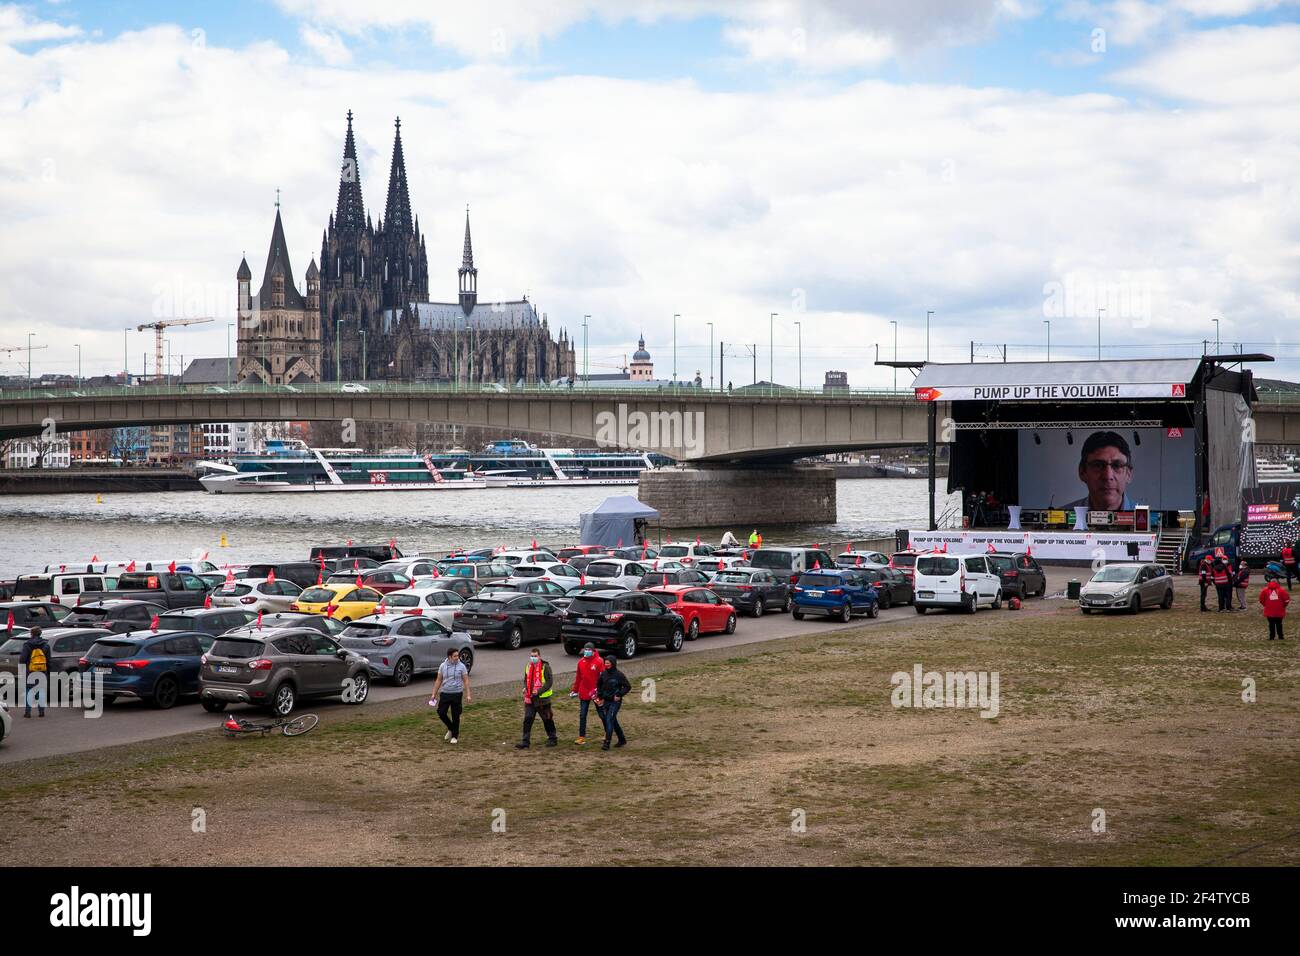 IG Metall (Industrial Union of Metalworkers) warning strike rally on March 17, 2021 on the banks of the Rhine in the Deutz district, participants stay Stock Photo